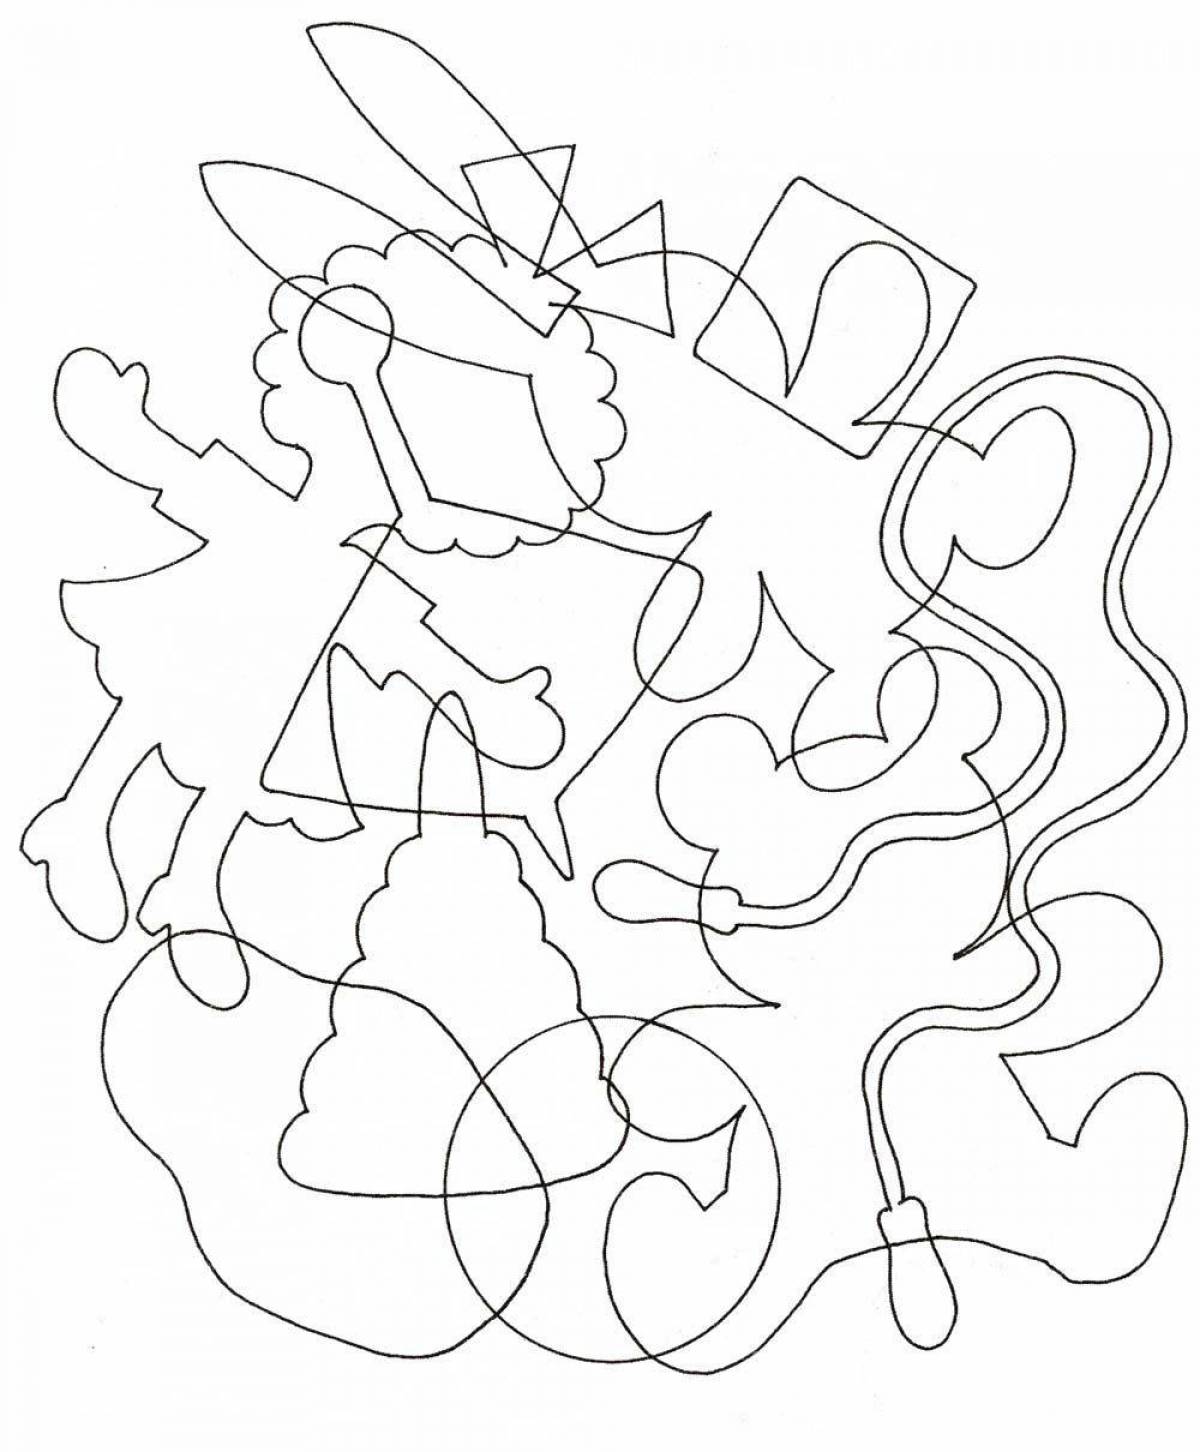 Coloring page mysterious confusion